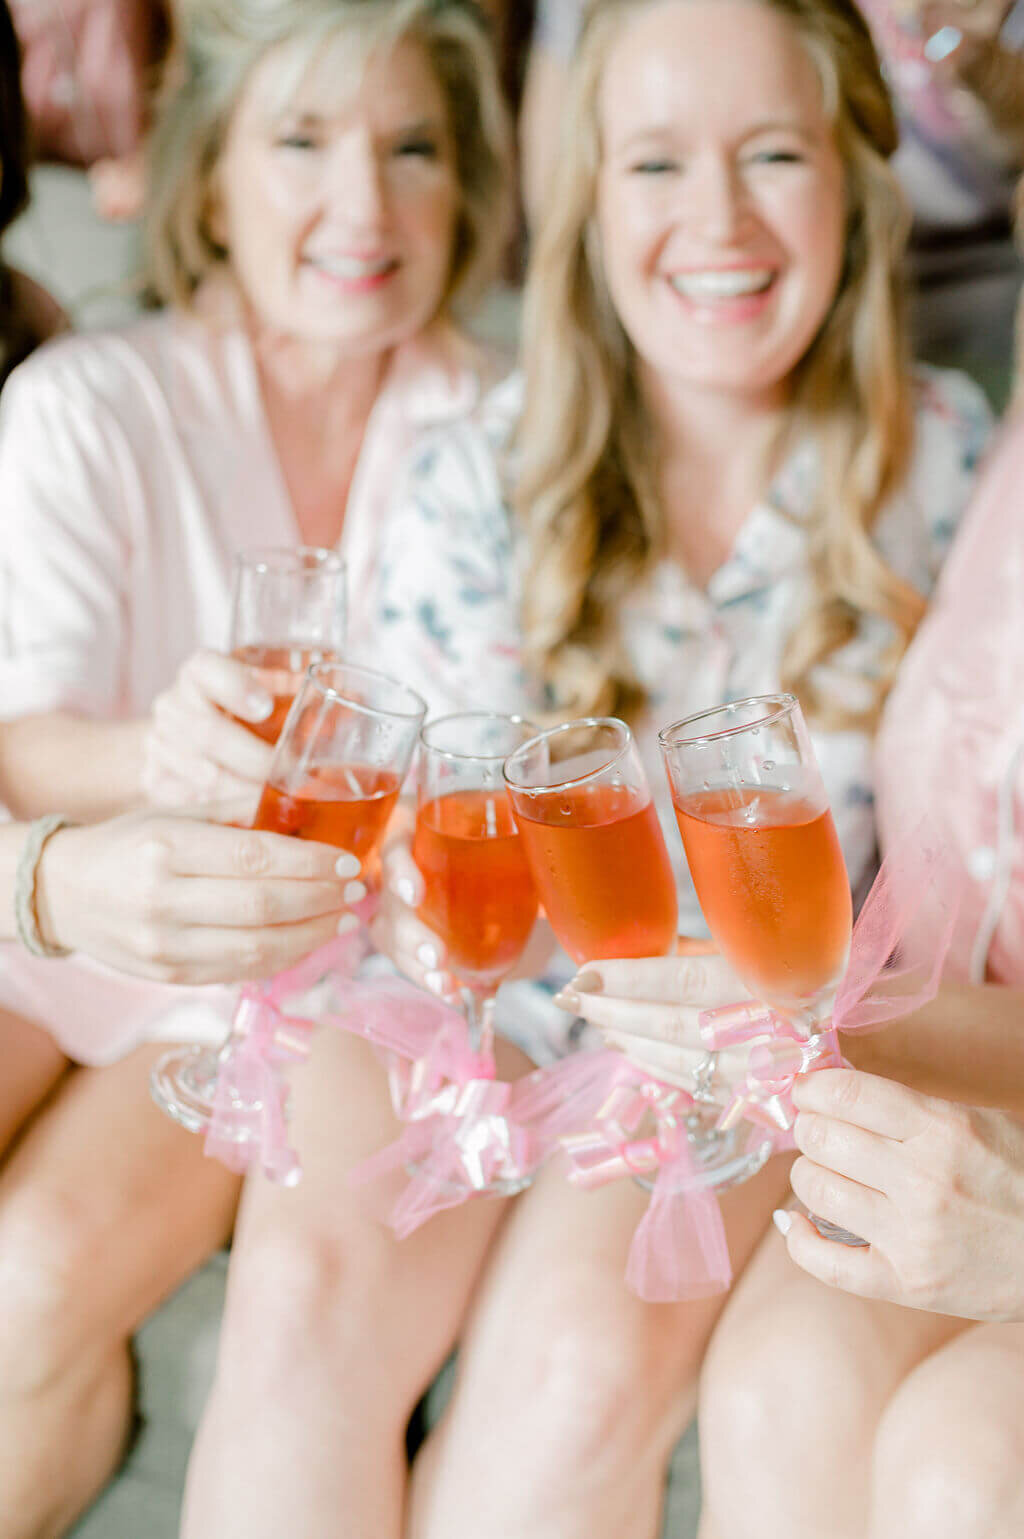 Bridal party toasting one another with glasses that have pink bows tied onto them